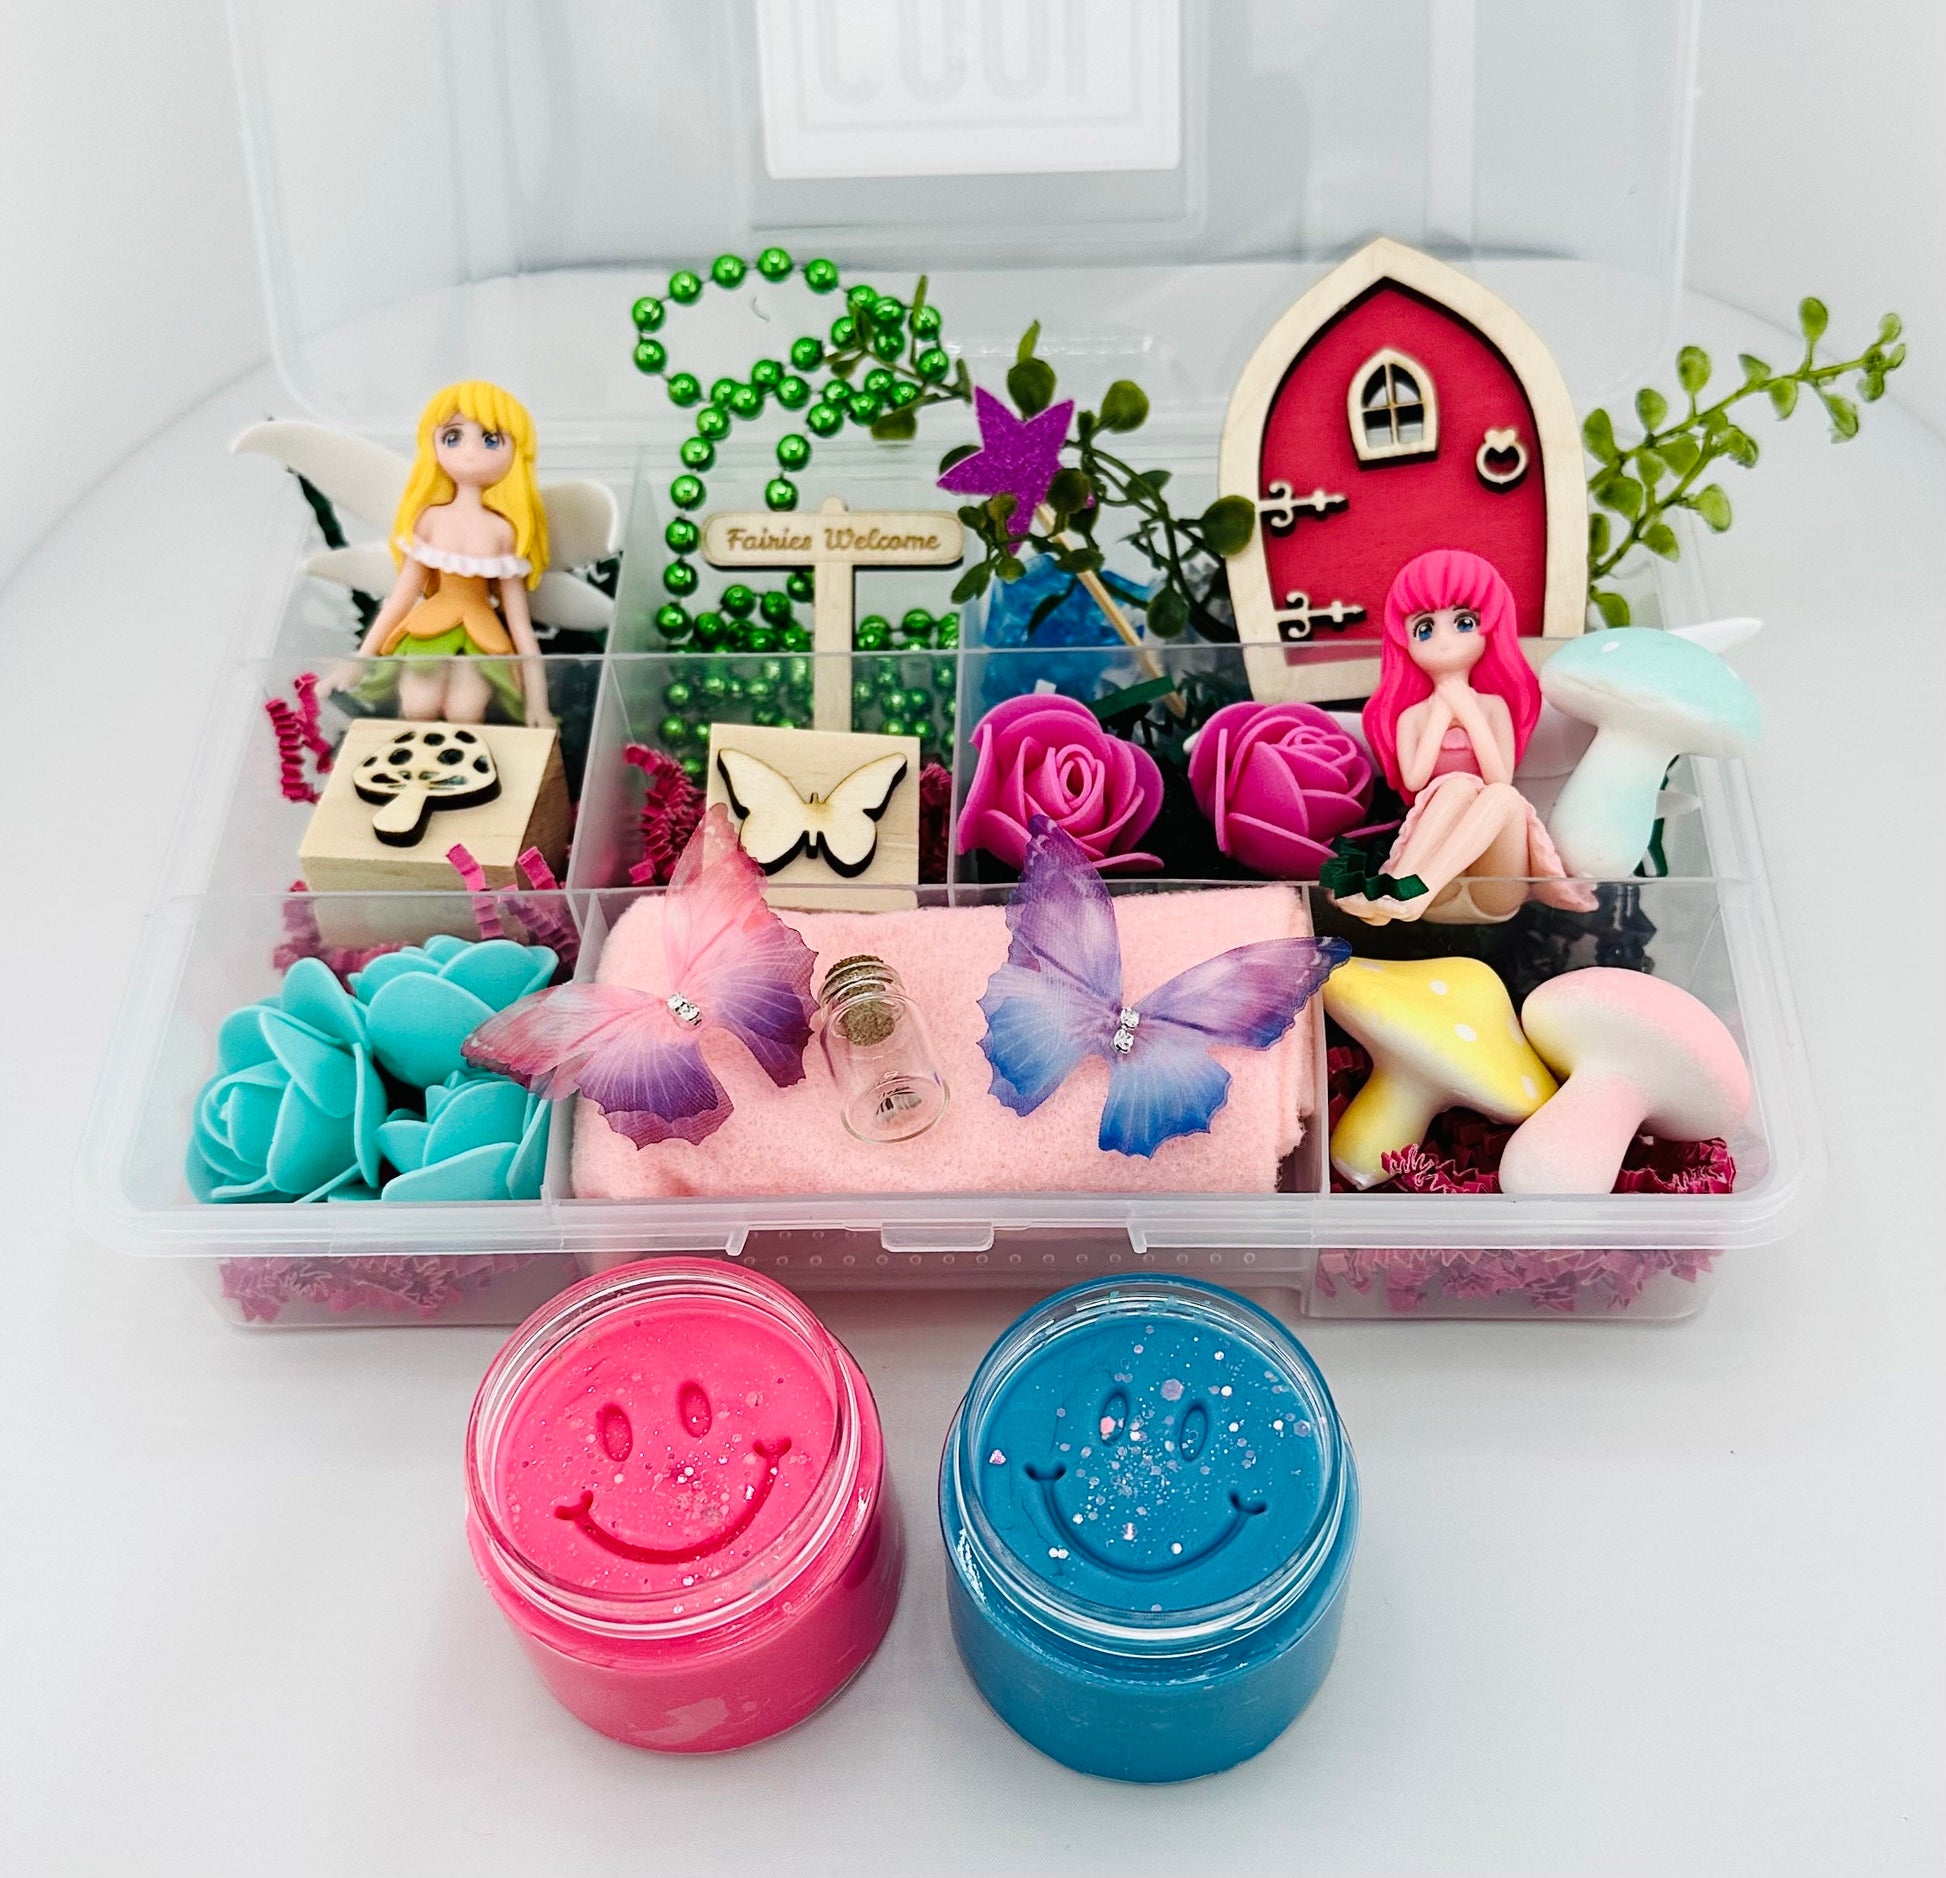 Fairy Garden Play Dough and Kinetic Sand Sensory Kit, Fairy Door Play Dough Busy Box, Montessori Adventure toys for Girls, Gift for Girls